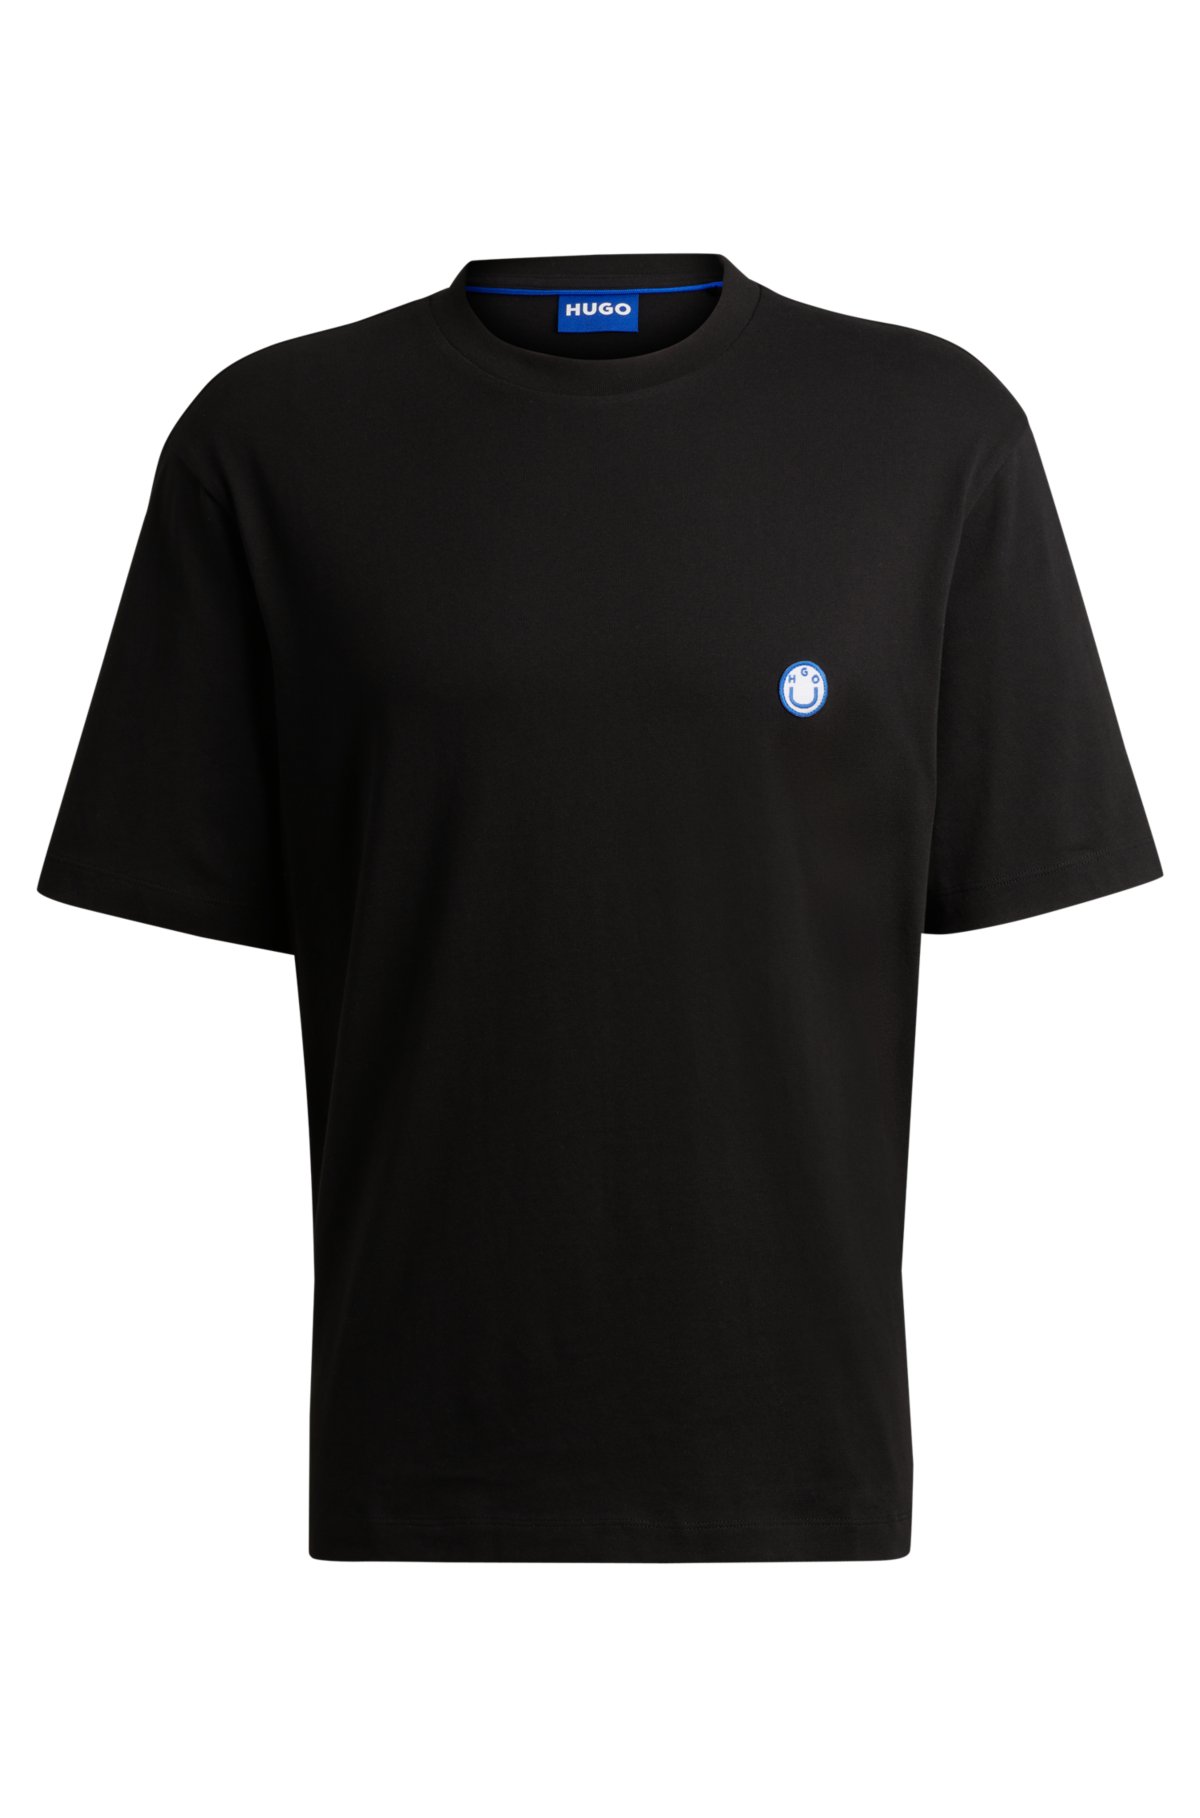 Cotton-jersey T-shirt with smiley-face logo, Black